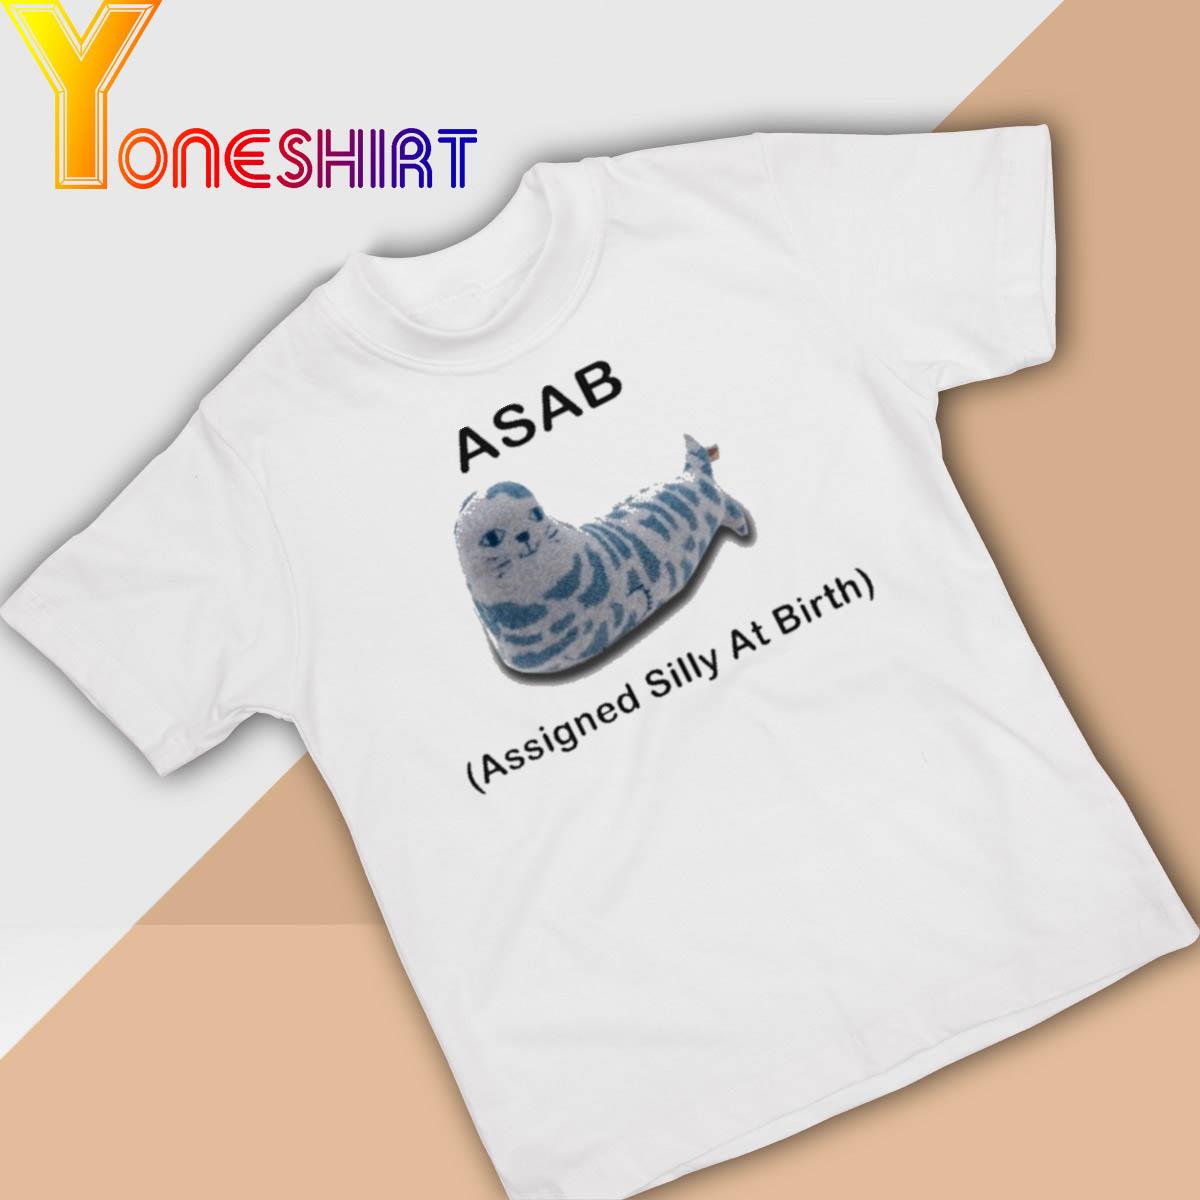 Asab Assigned Silly At Birth Shirt